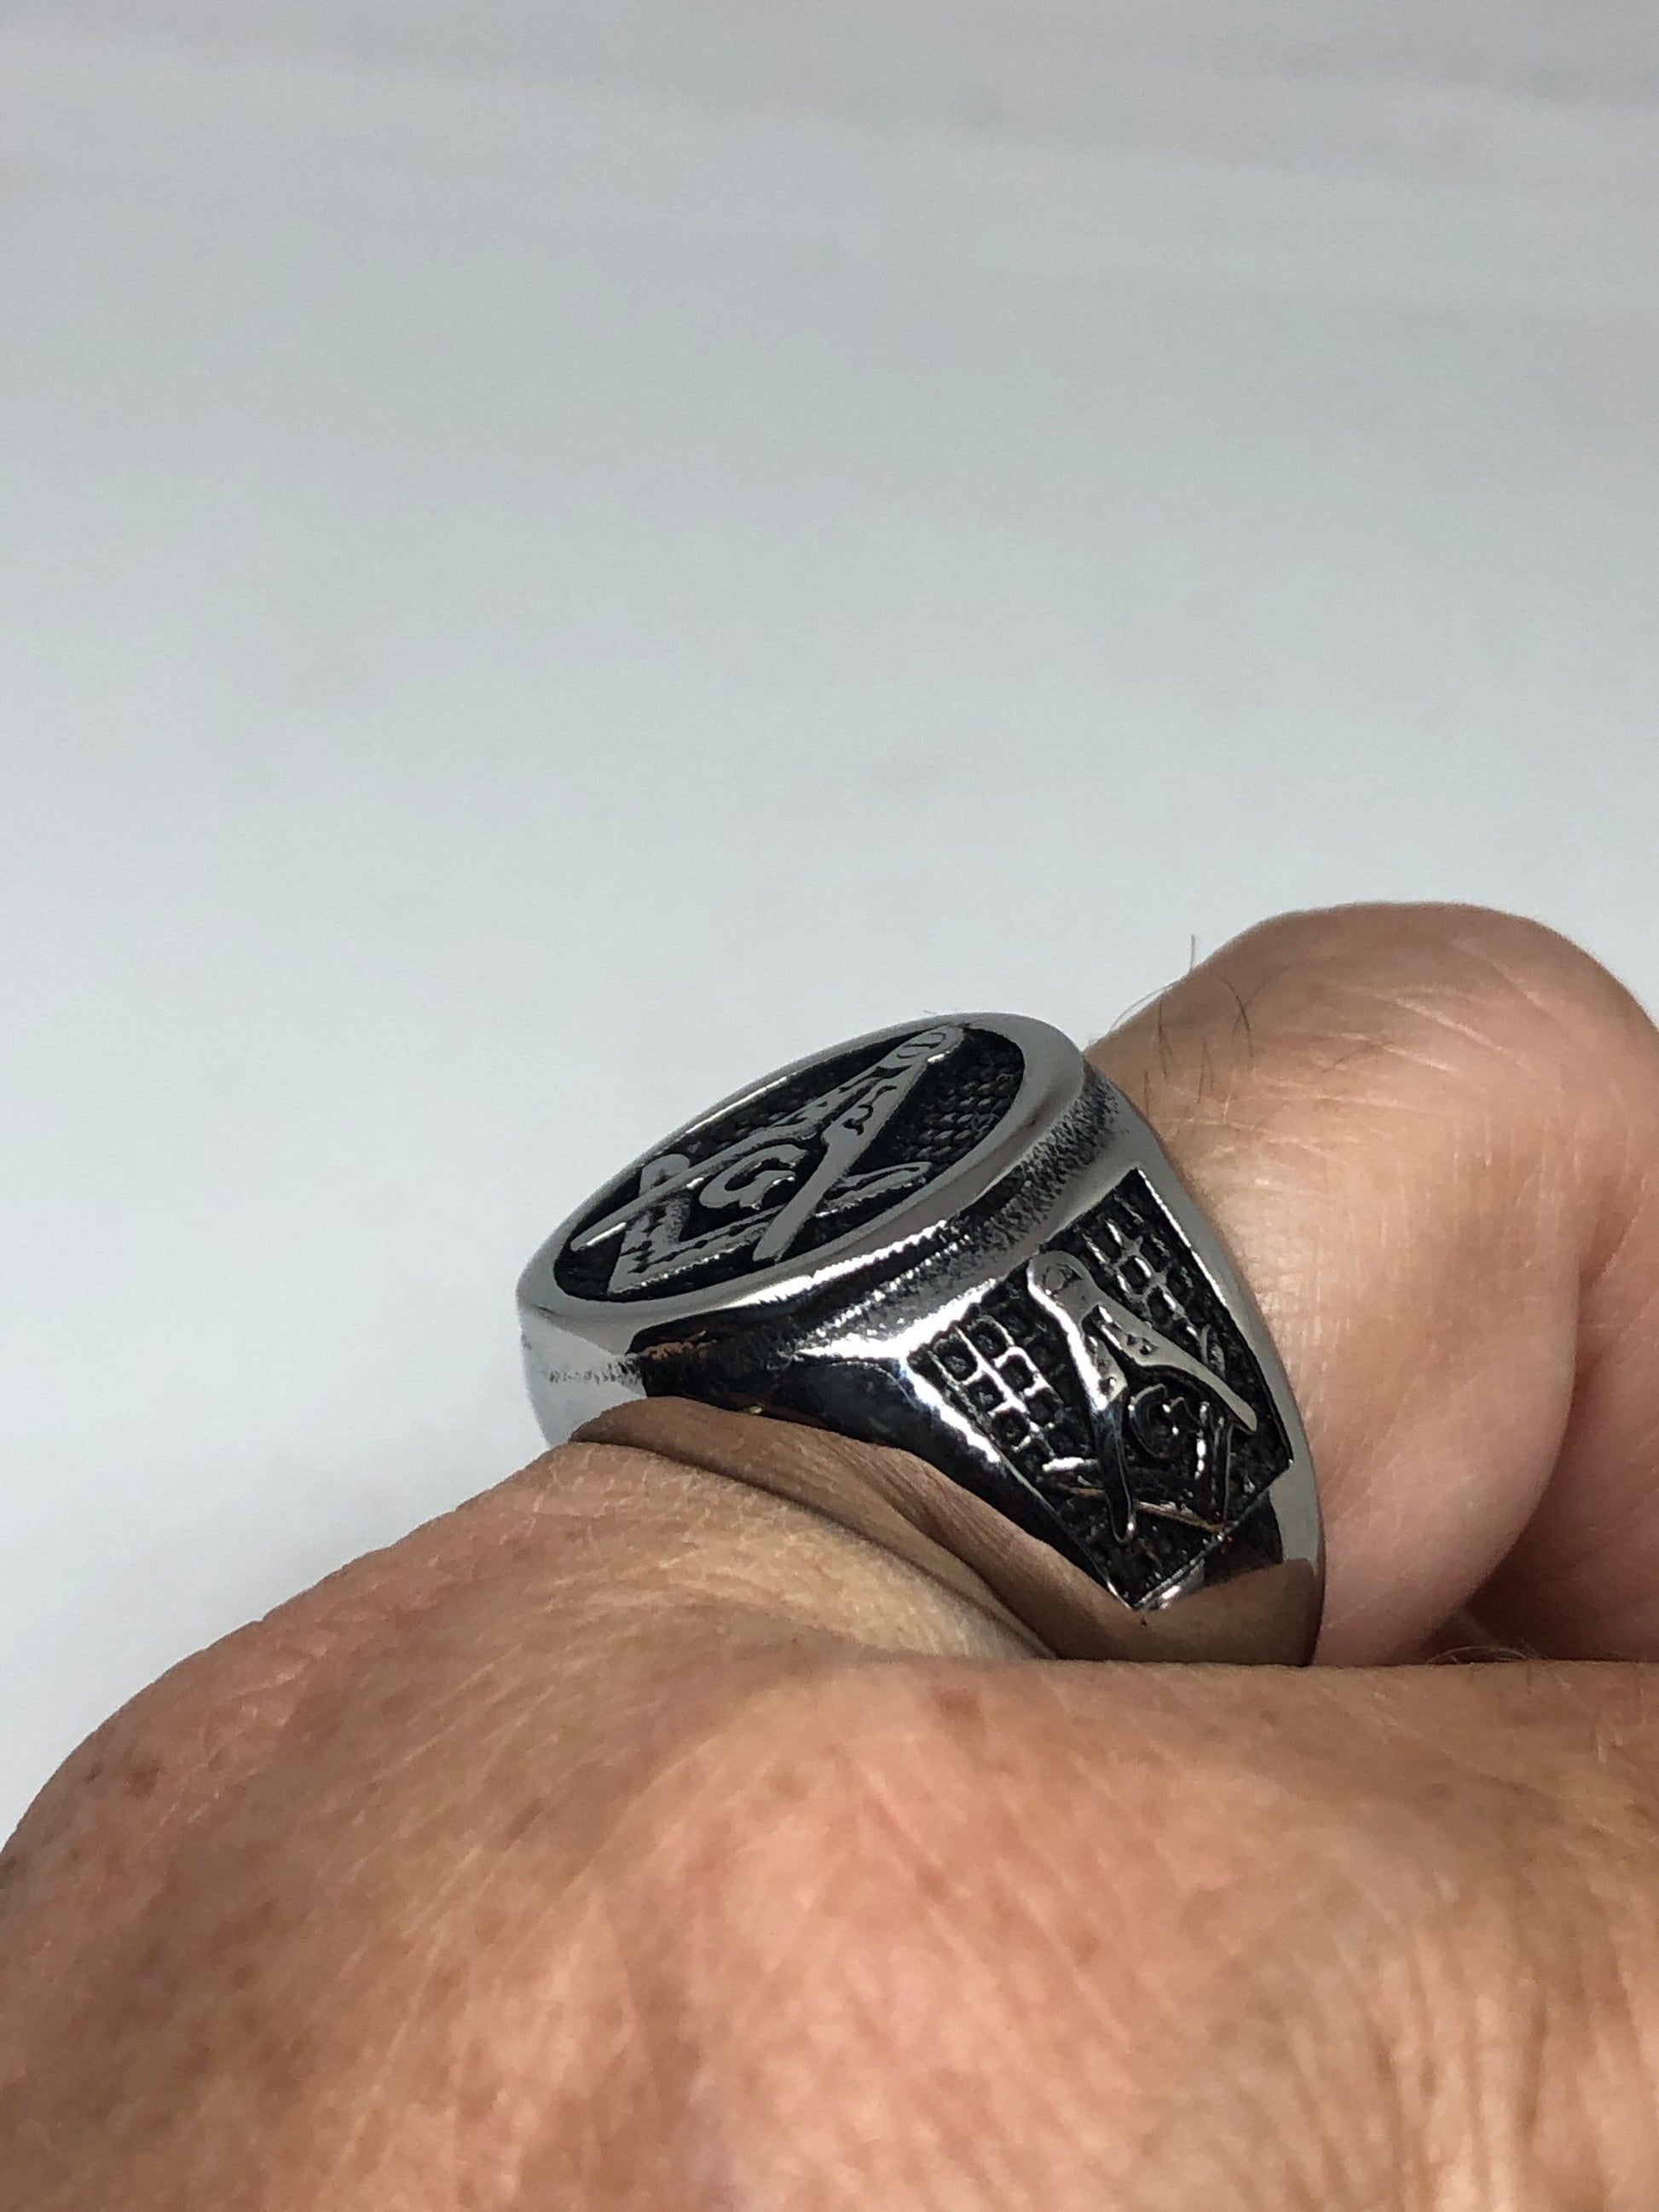 Vintage Gothic Stainless Steel Free Mason G Mens Ring